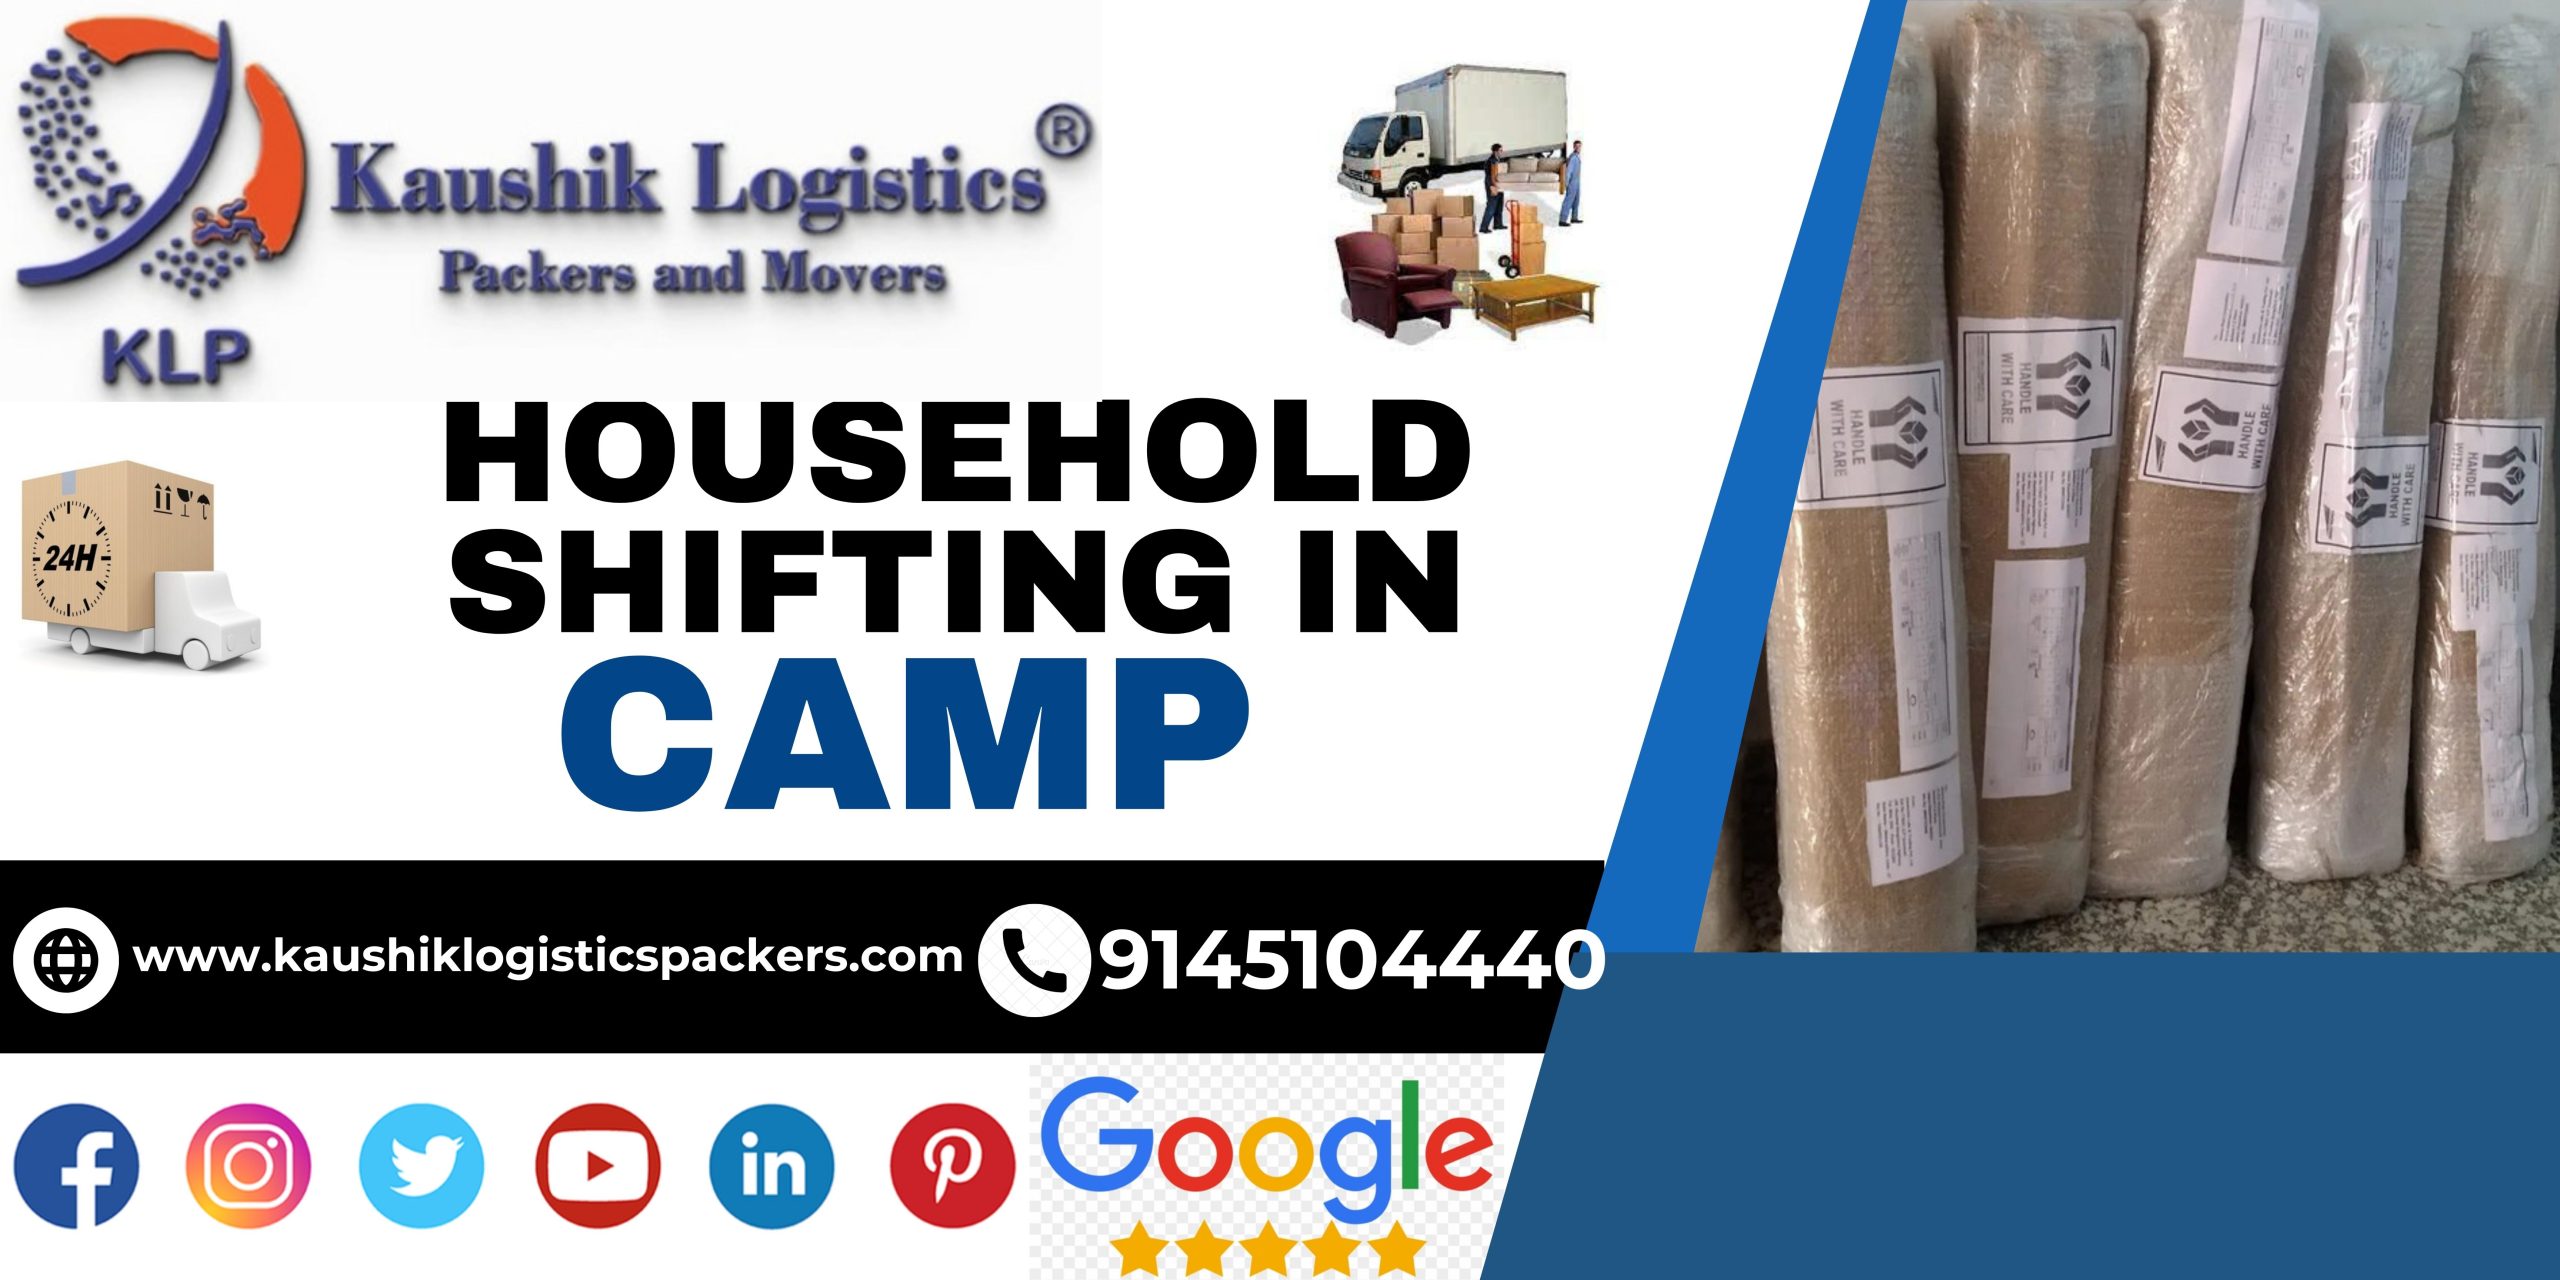 Packers and Movers In Camp